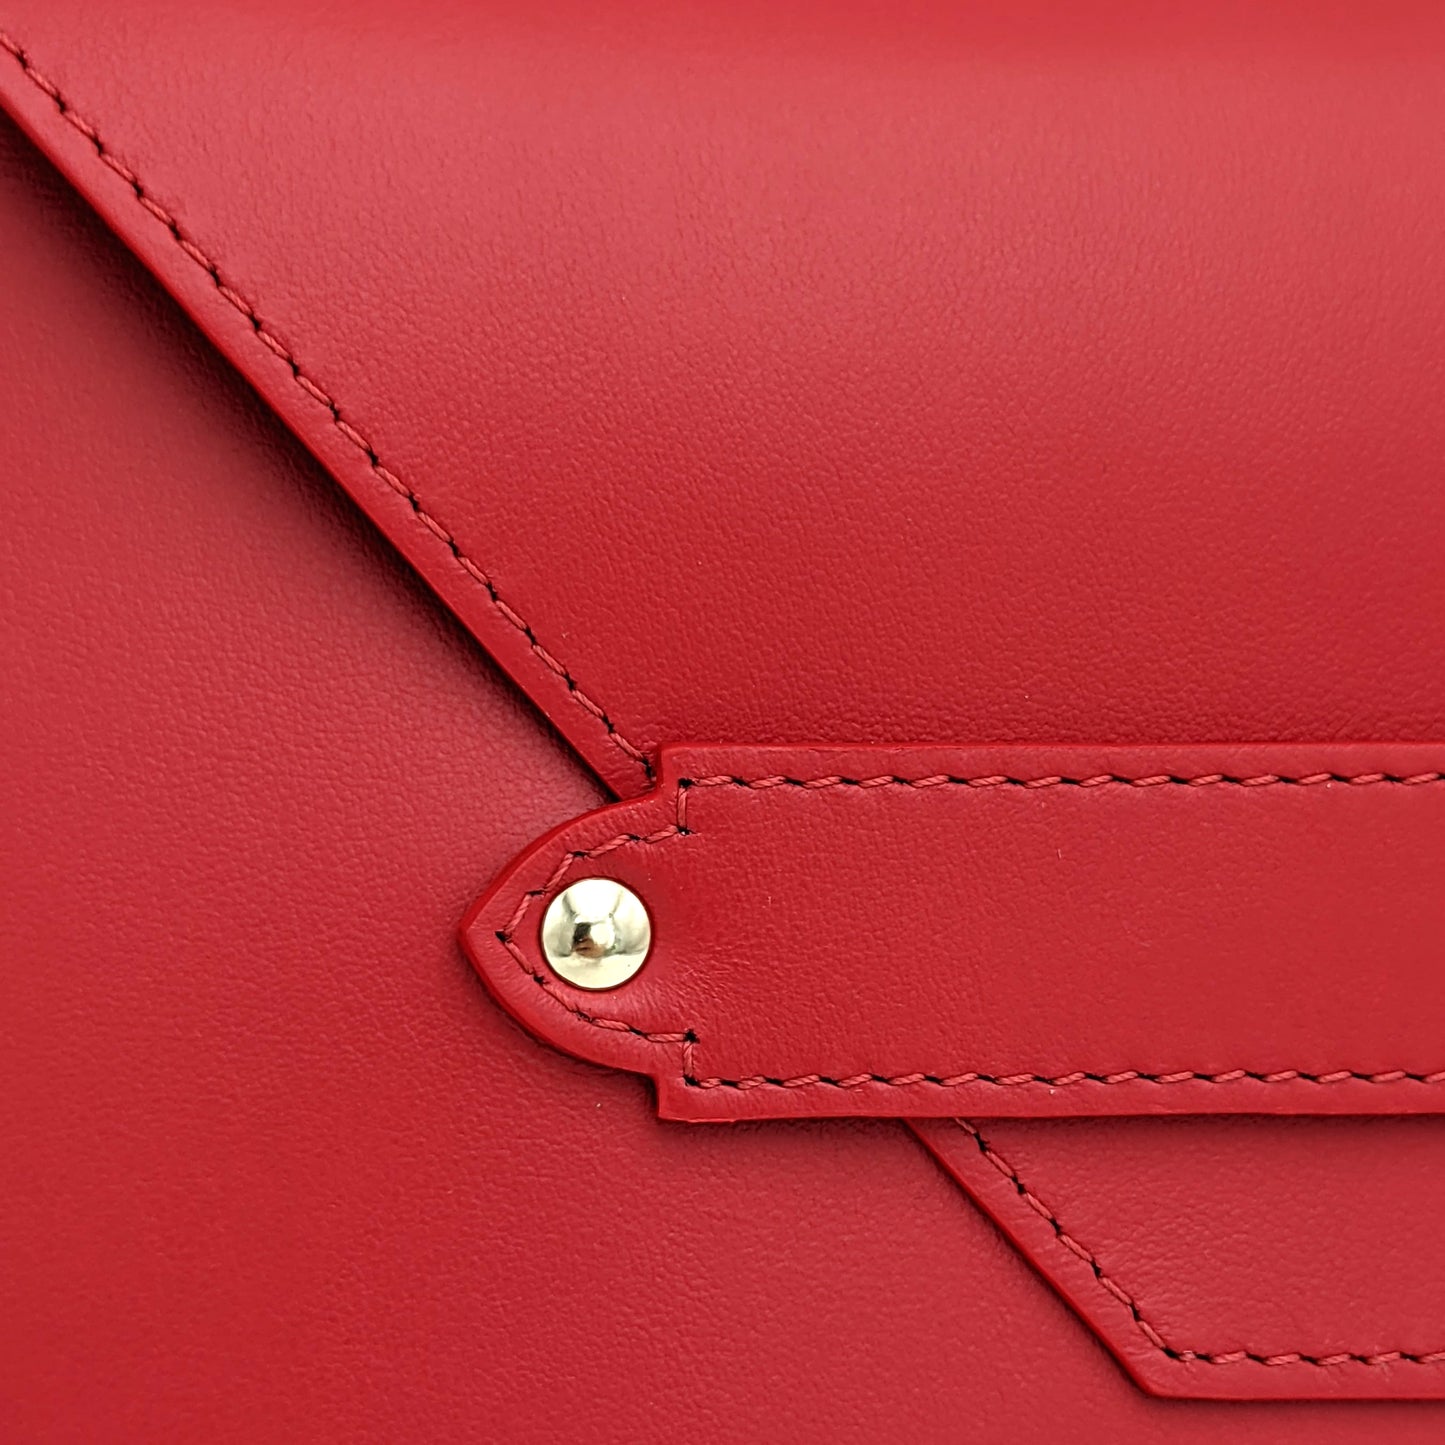 Leather pouch - red - French Address